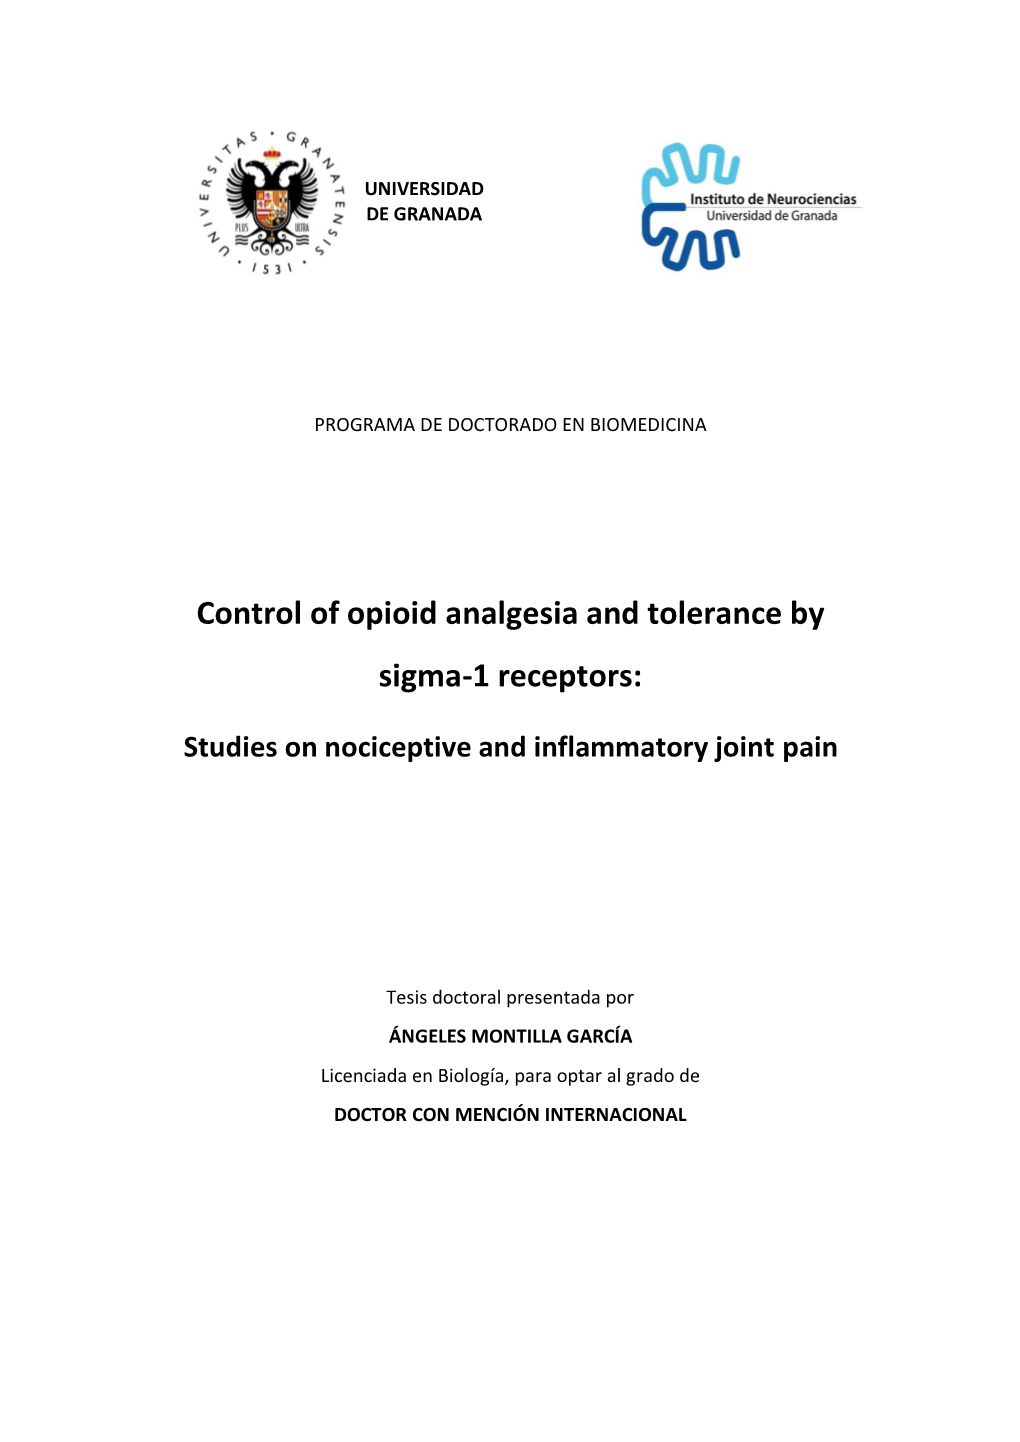 Control of Opioid Analgesia and Tolerance by Sigma-1 Receptors